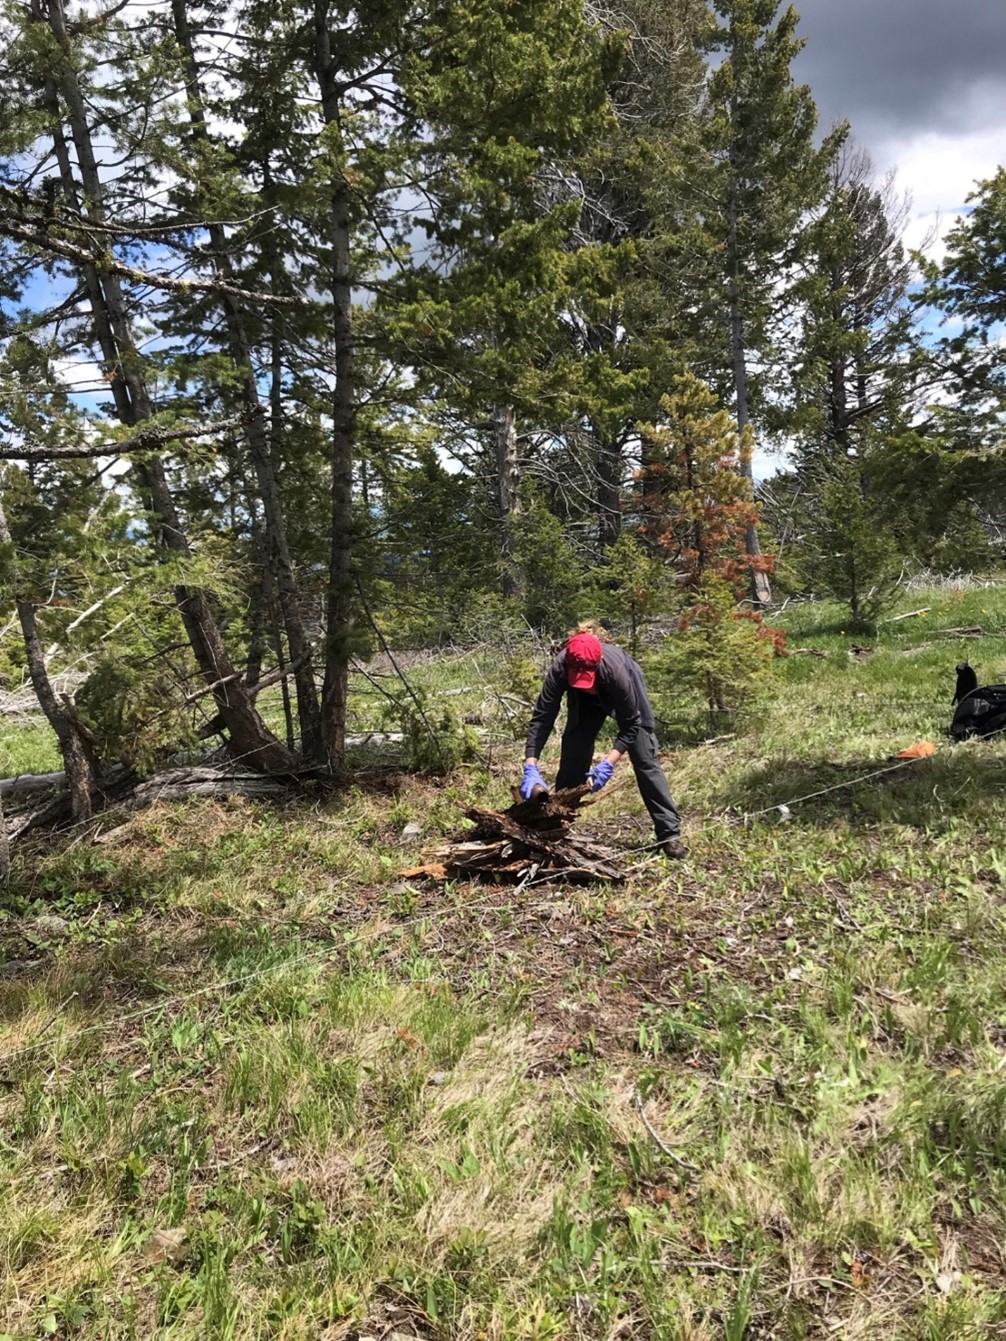 Setting up a monitoring station for detecting grizzly bears